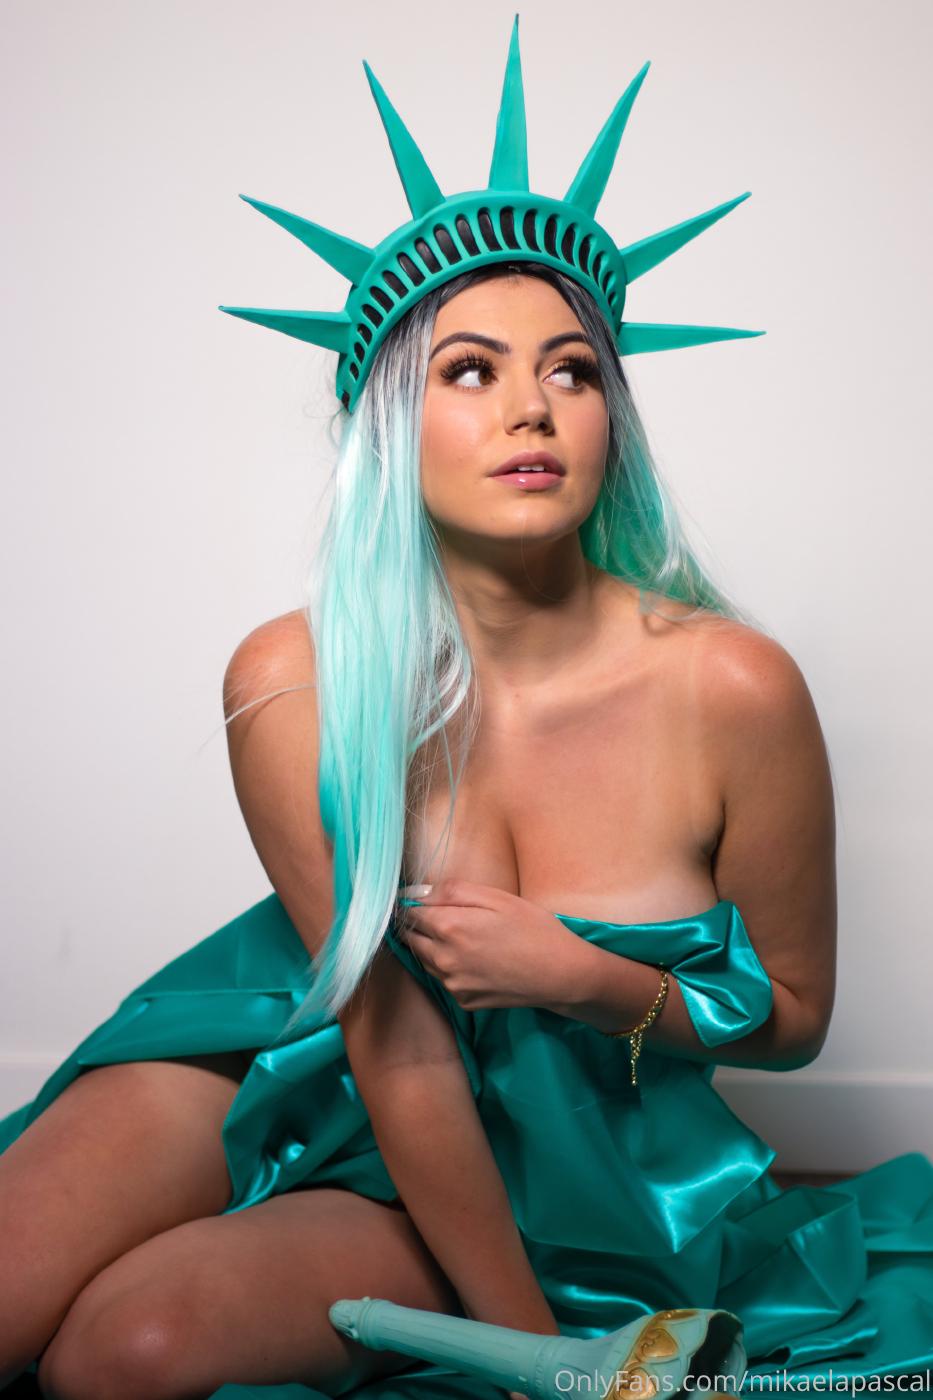 mikaela pascal 4th of july costume onlyfans set leaked NGLCJW